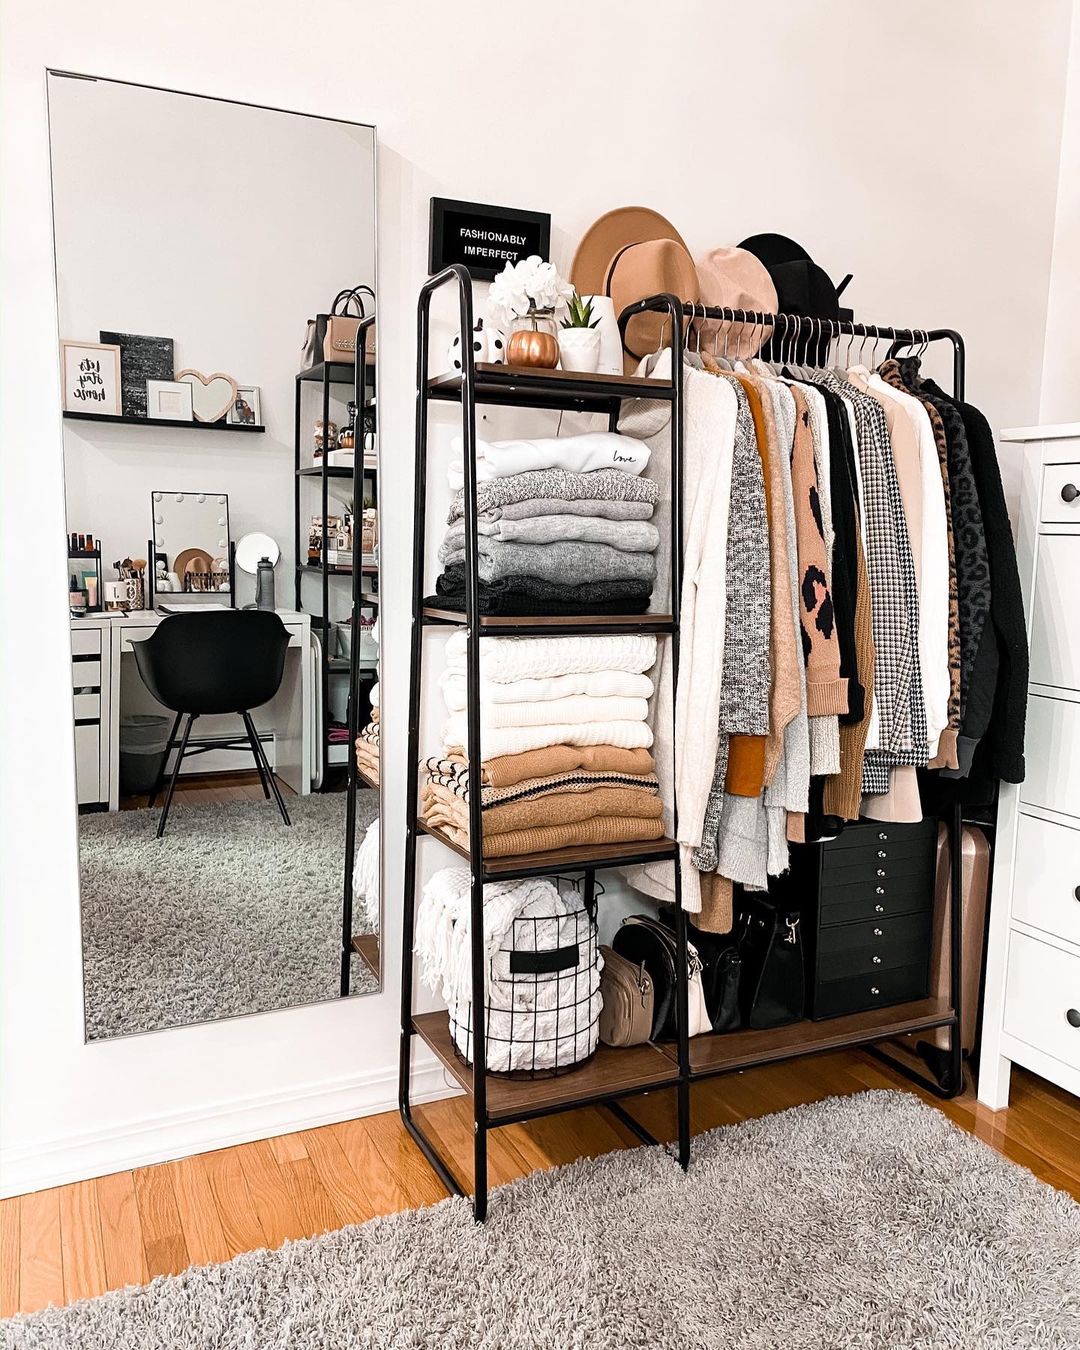 Clothing rack full with hanging clothes, and the shelves are full with clothes and other items as well. Photo by Instagram user @fashionablyimperfect.